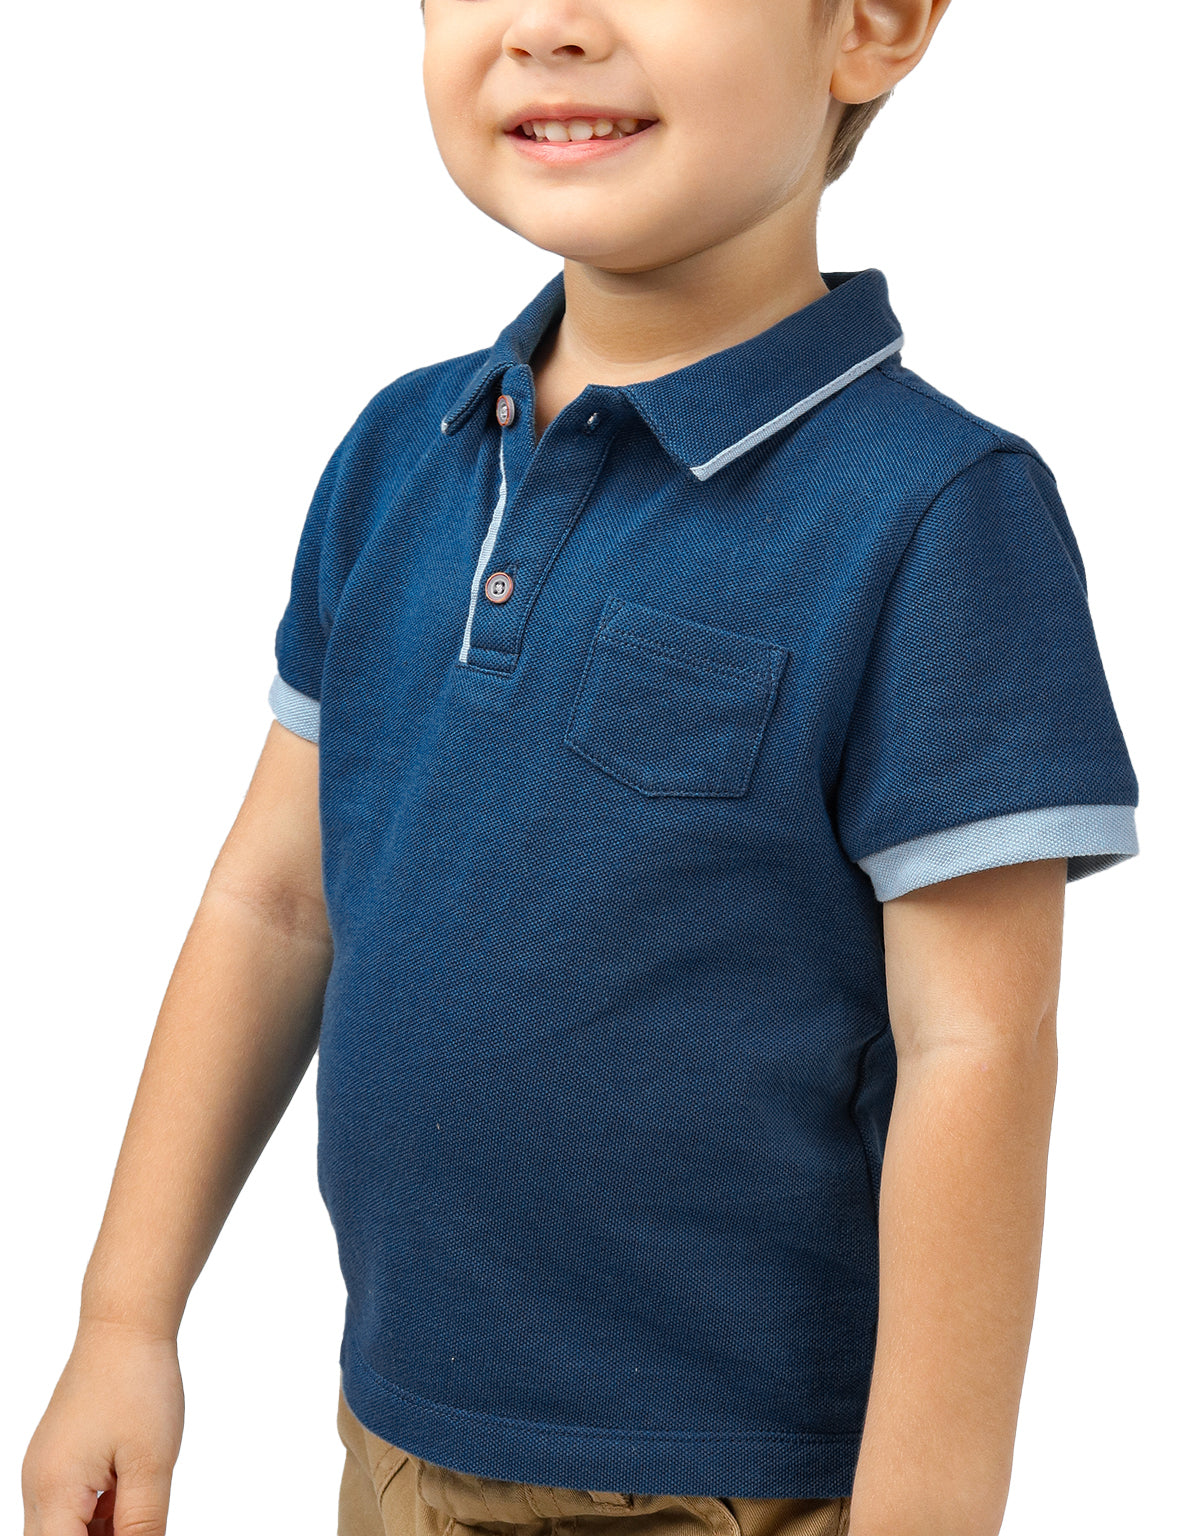 BABY BOYS BABY POLO SHIRT WITH SMALL POCKET